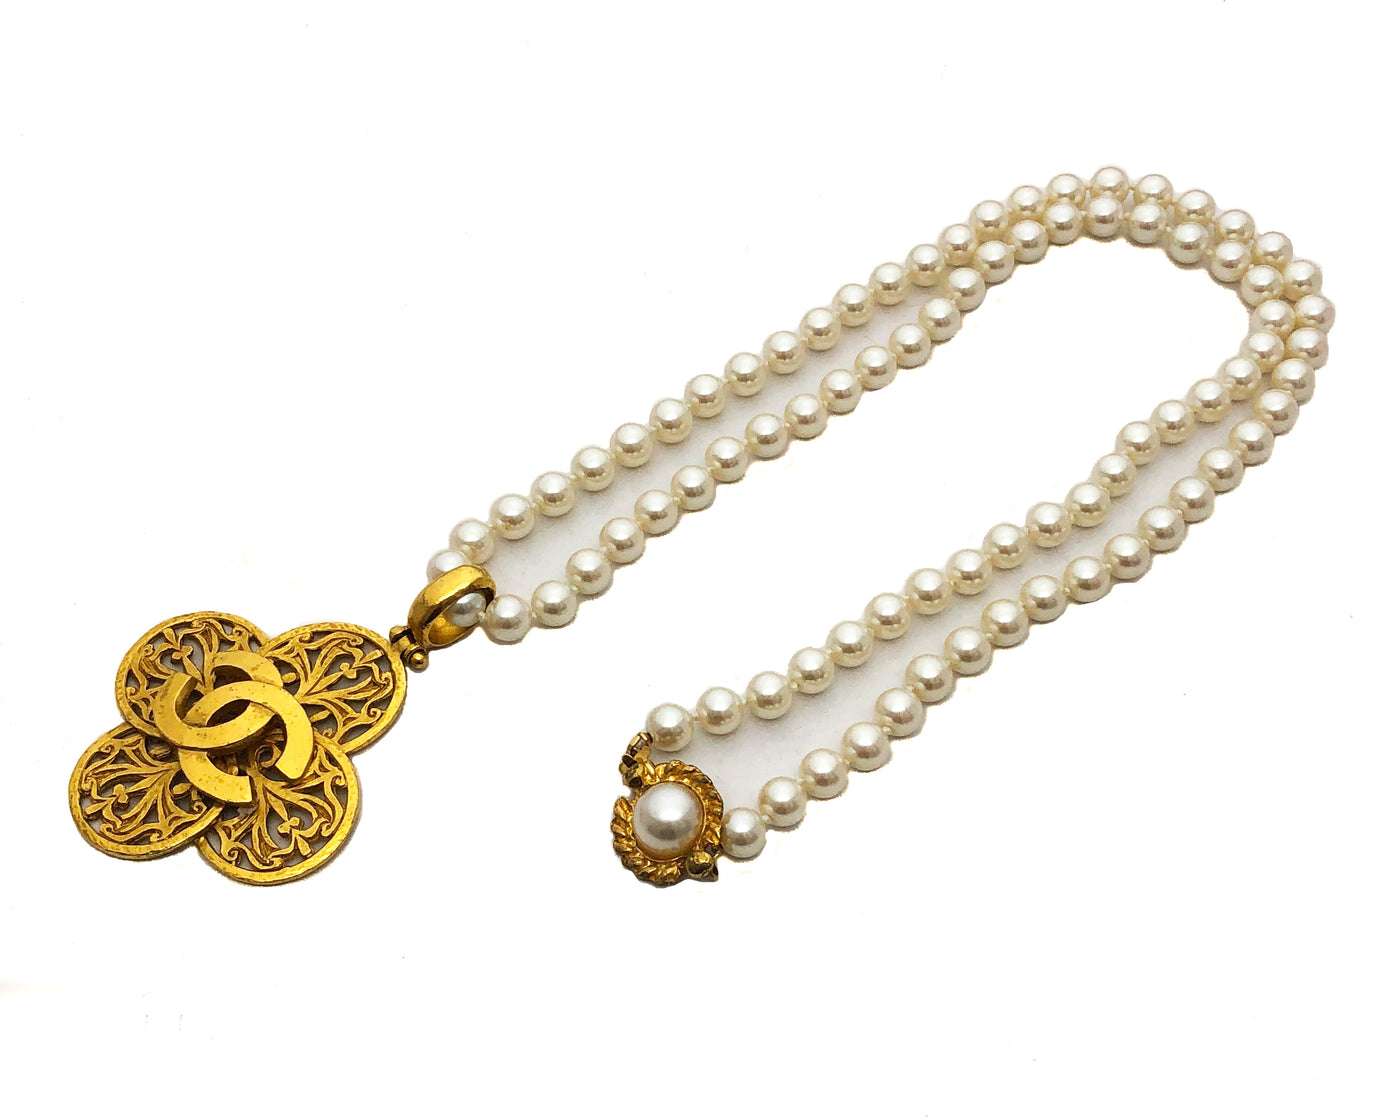 Chanel Vintage Pearl & Large Cross Iconic Pendant Necklace